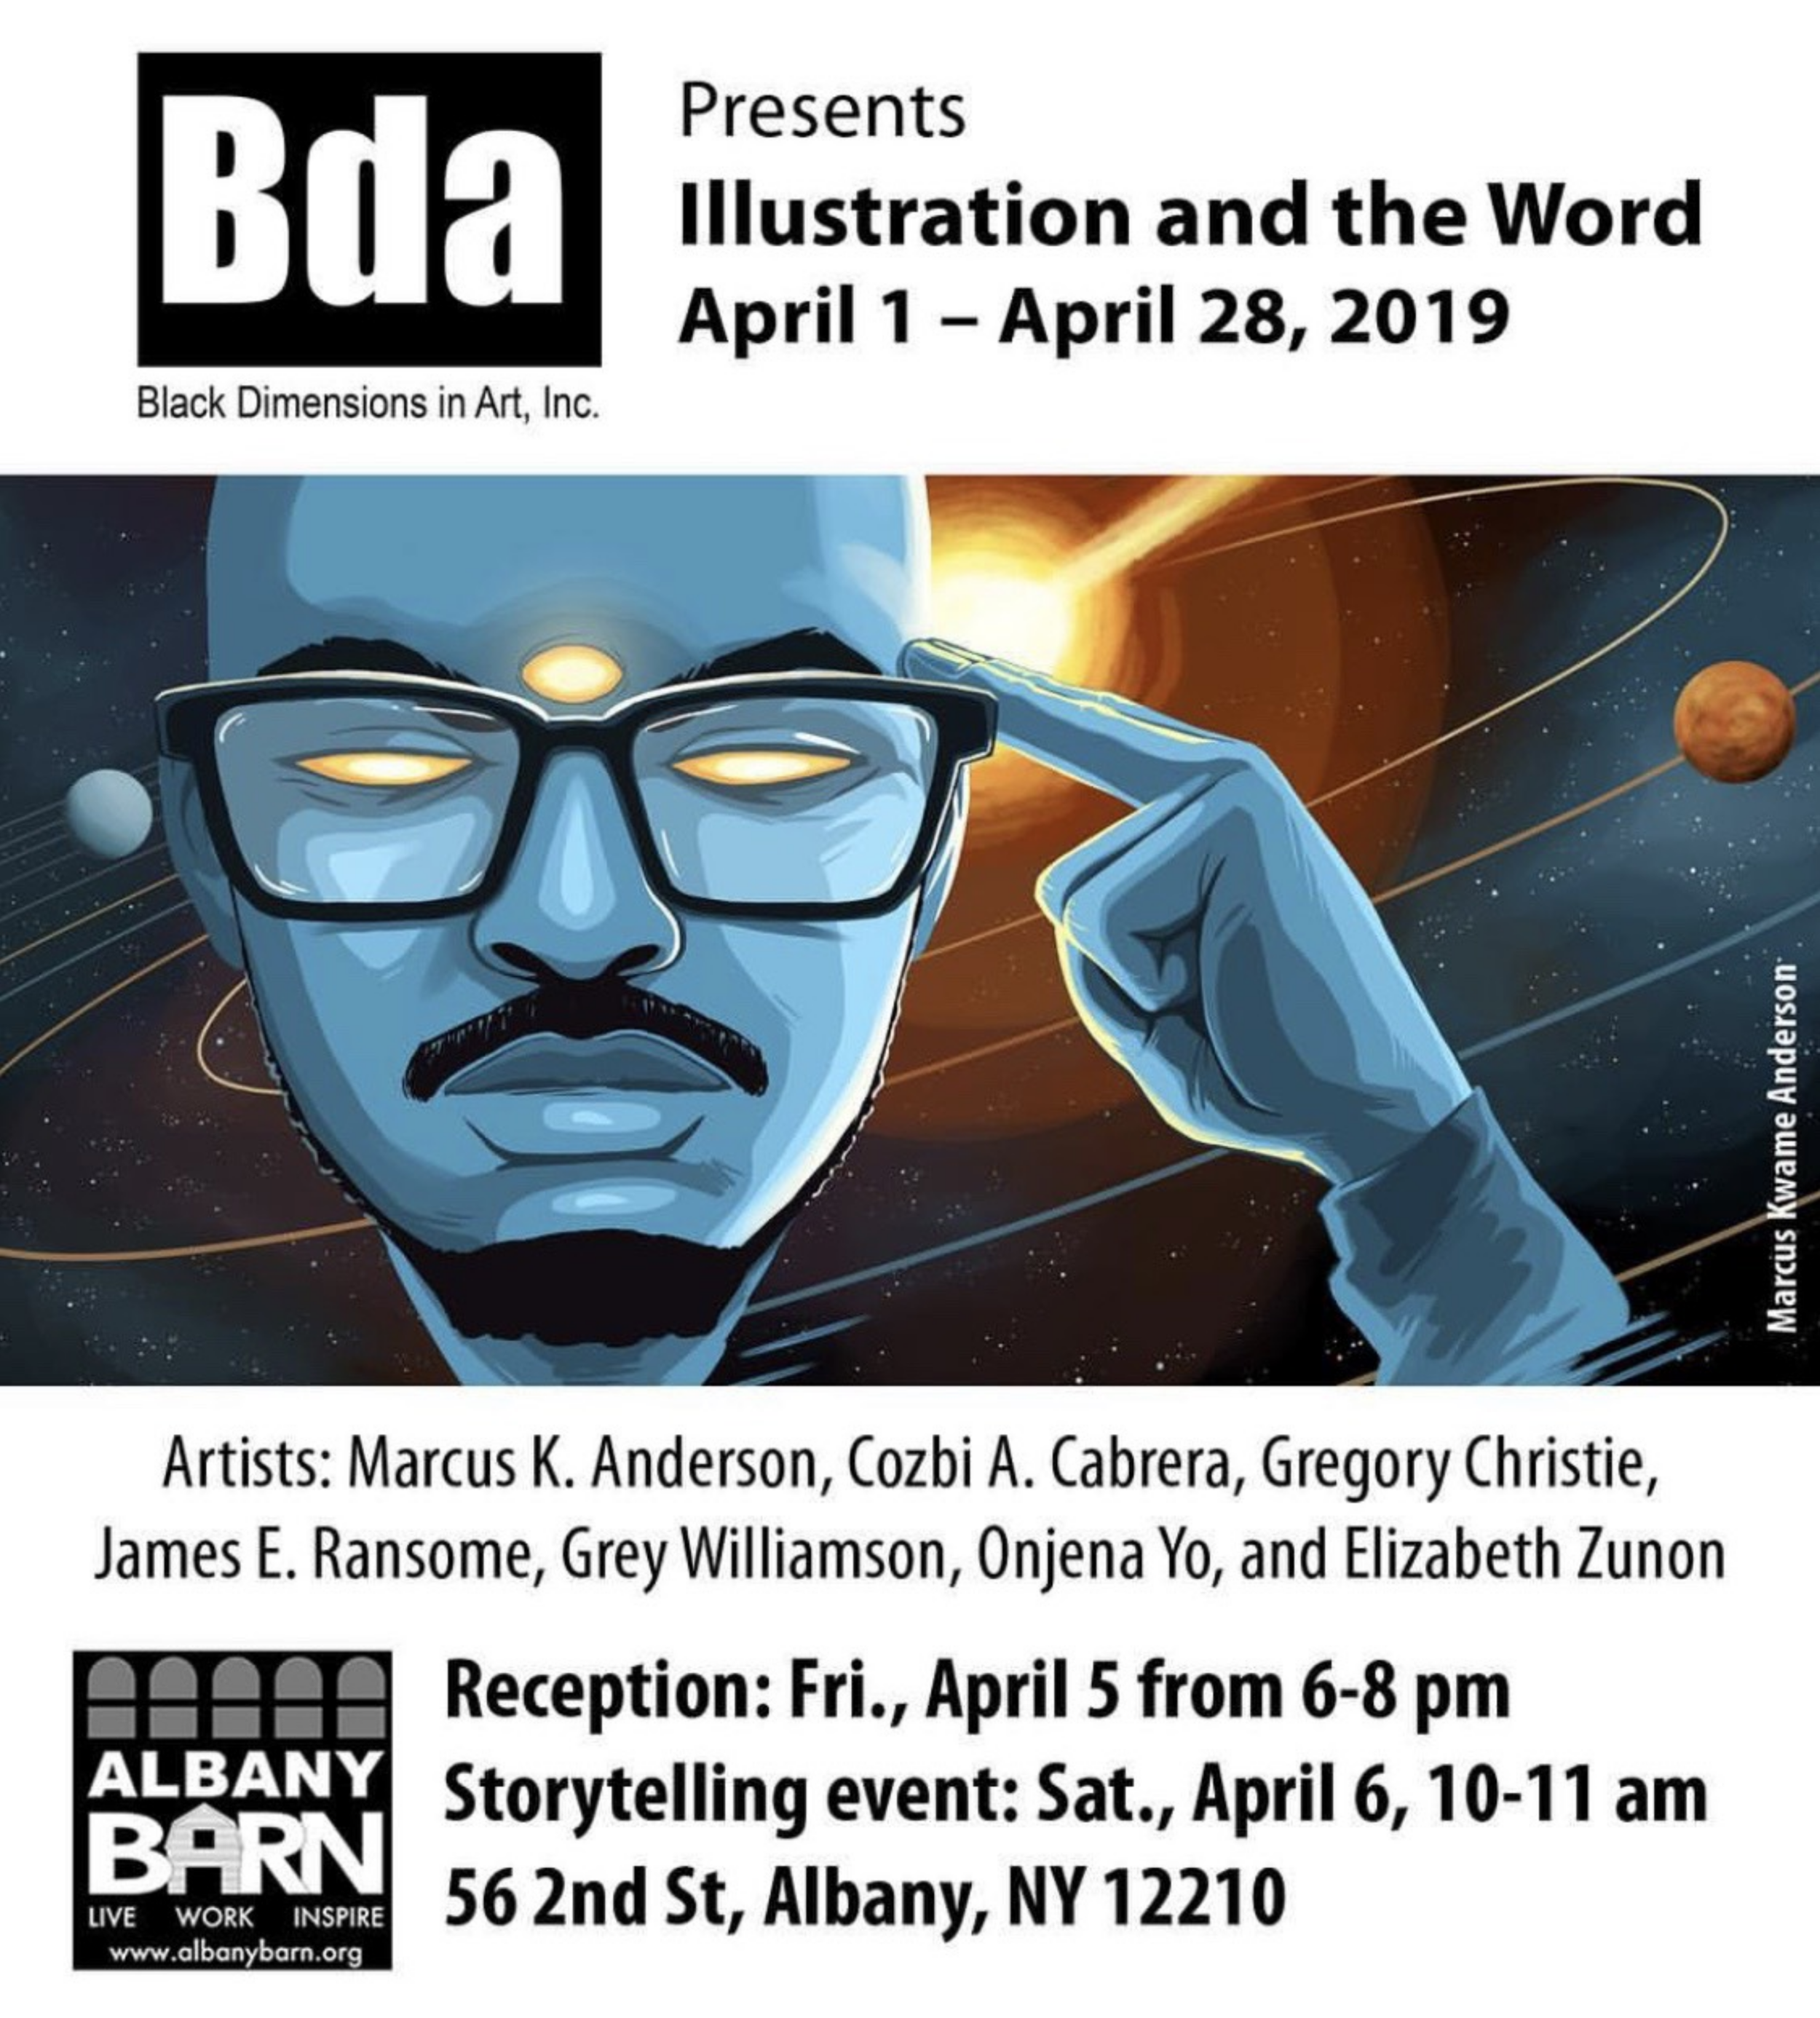 BDA_Exhibit_Illustration_and_the_Word_Albany_Barn_April_2019_2.png